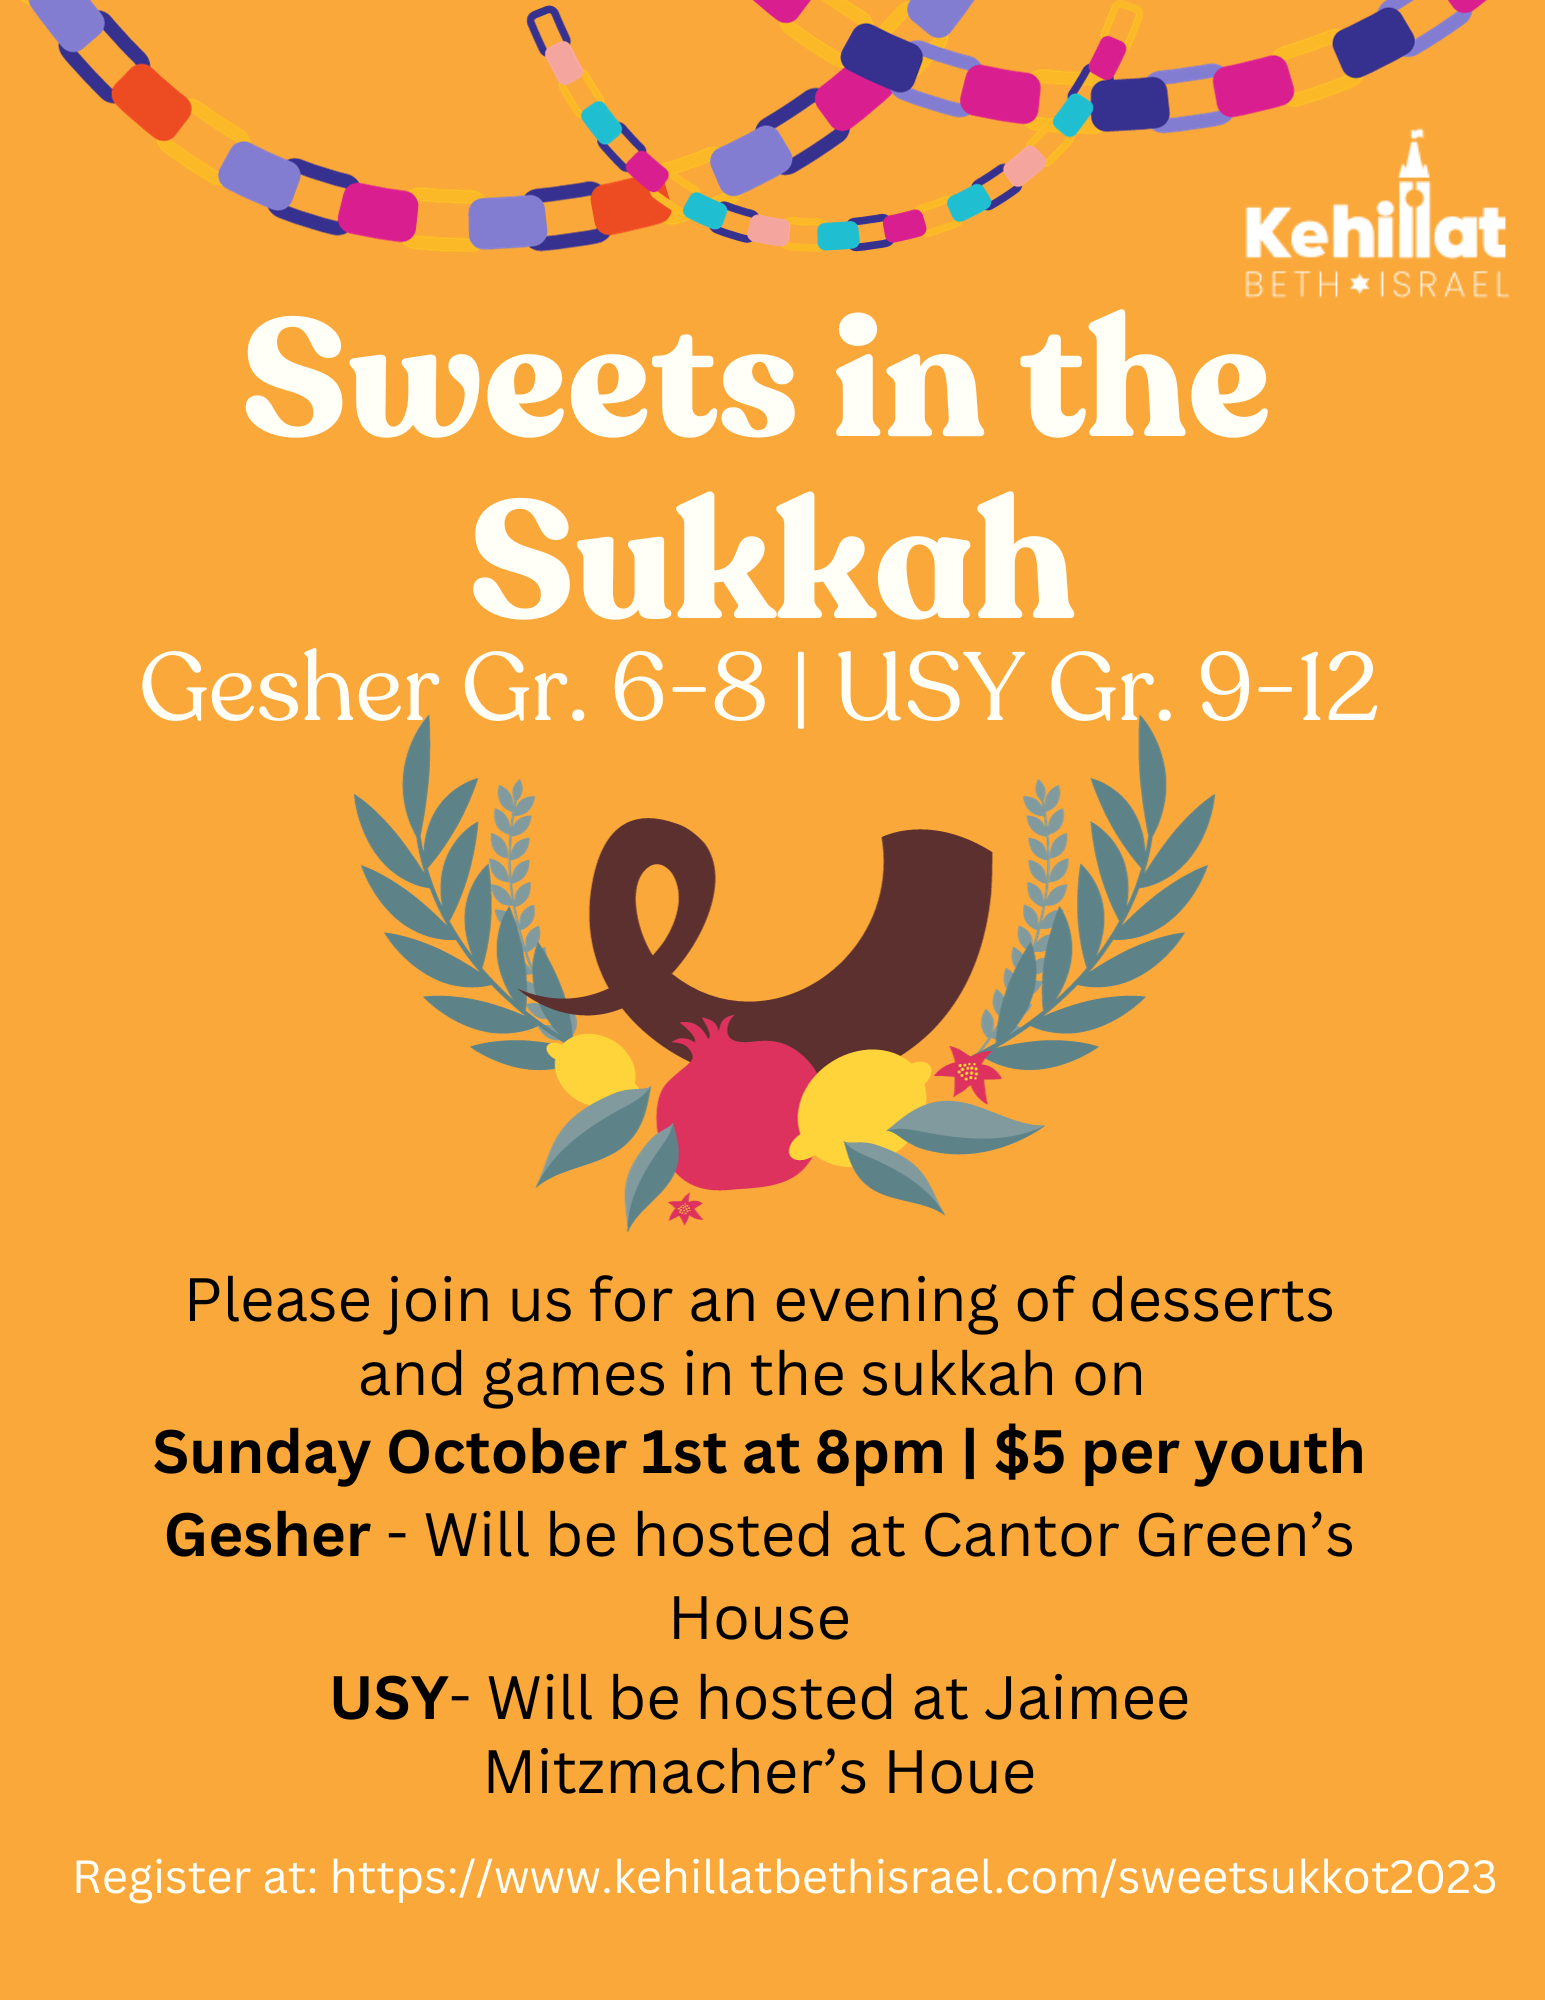 Sweets in the Sukkah